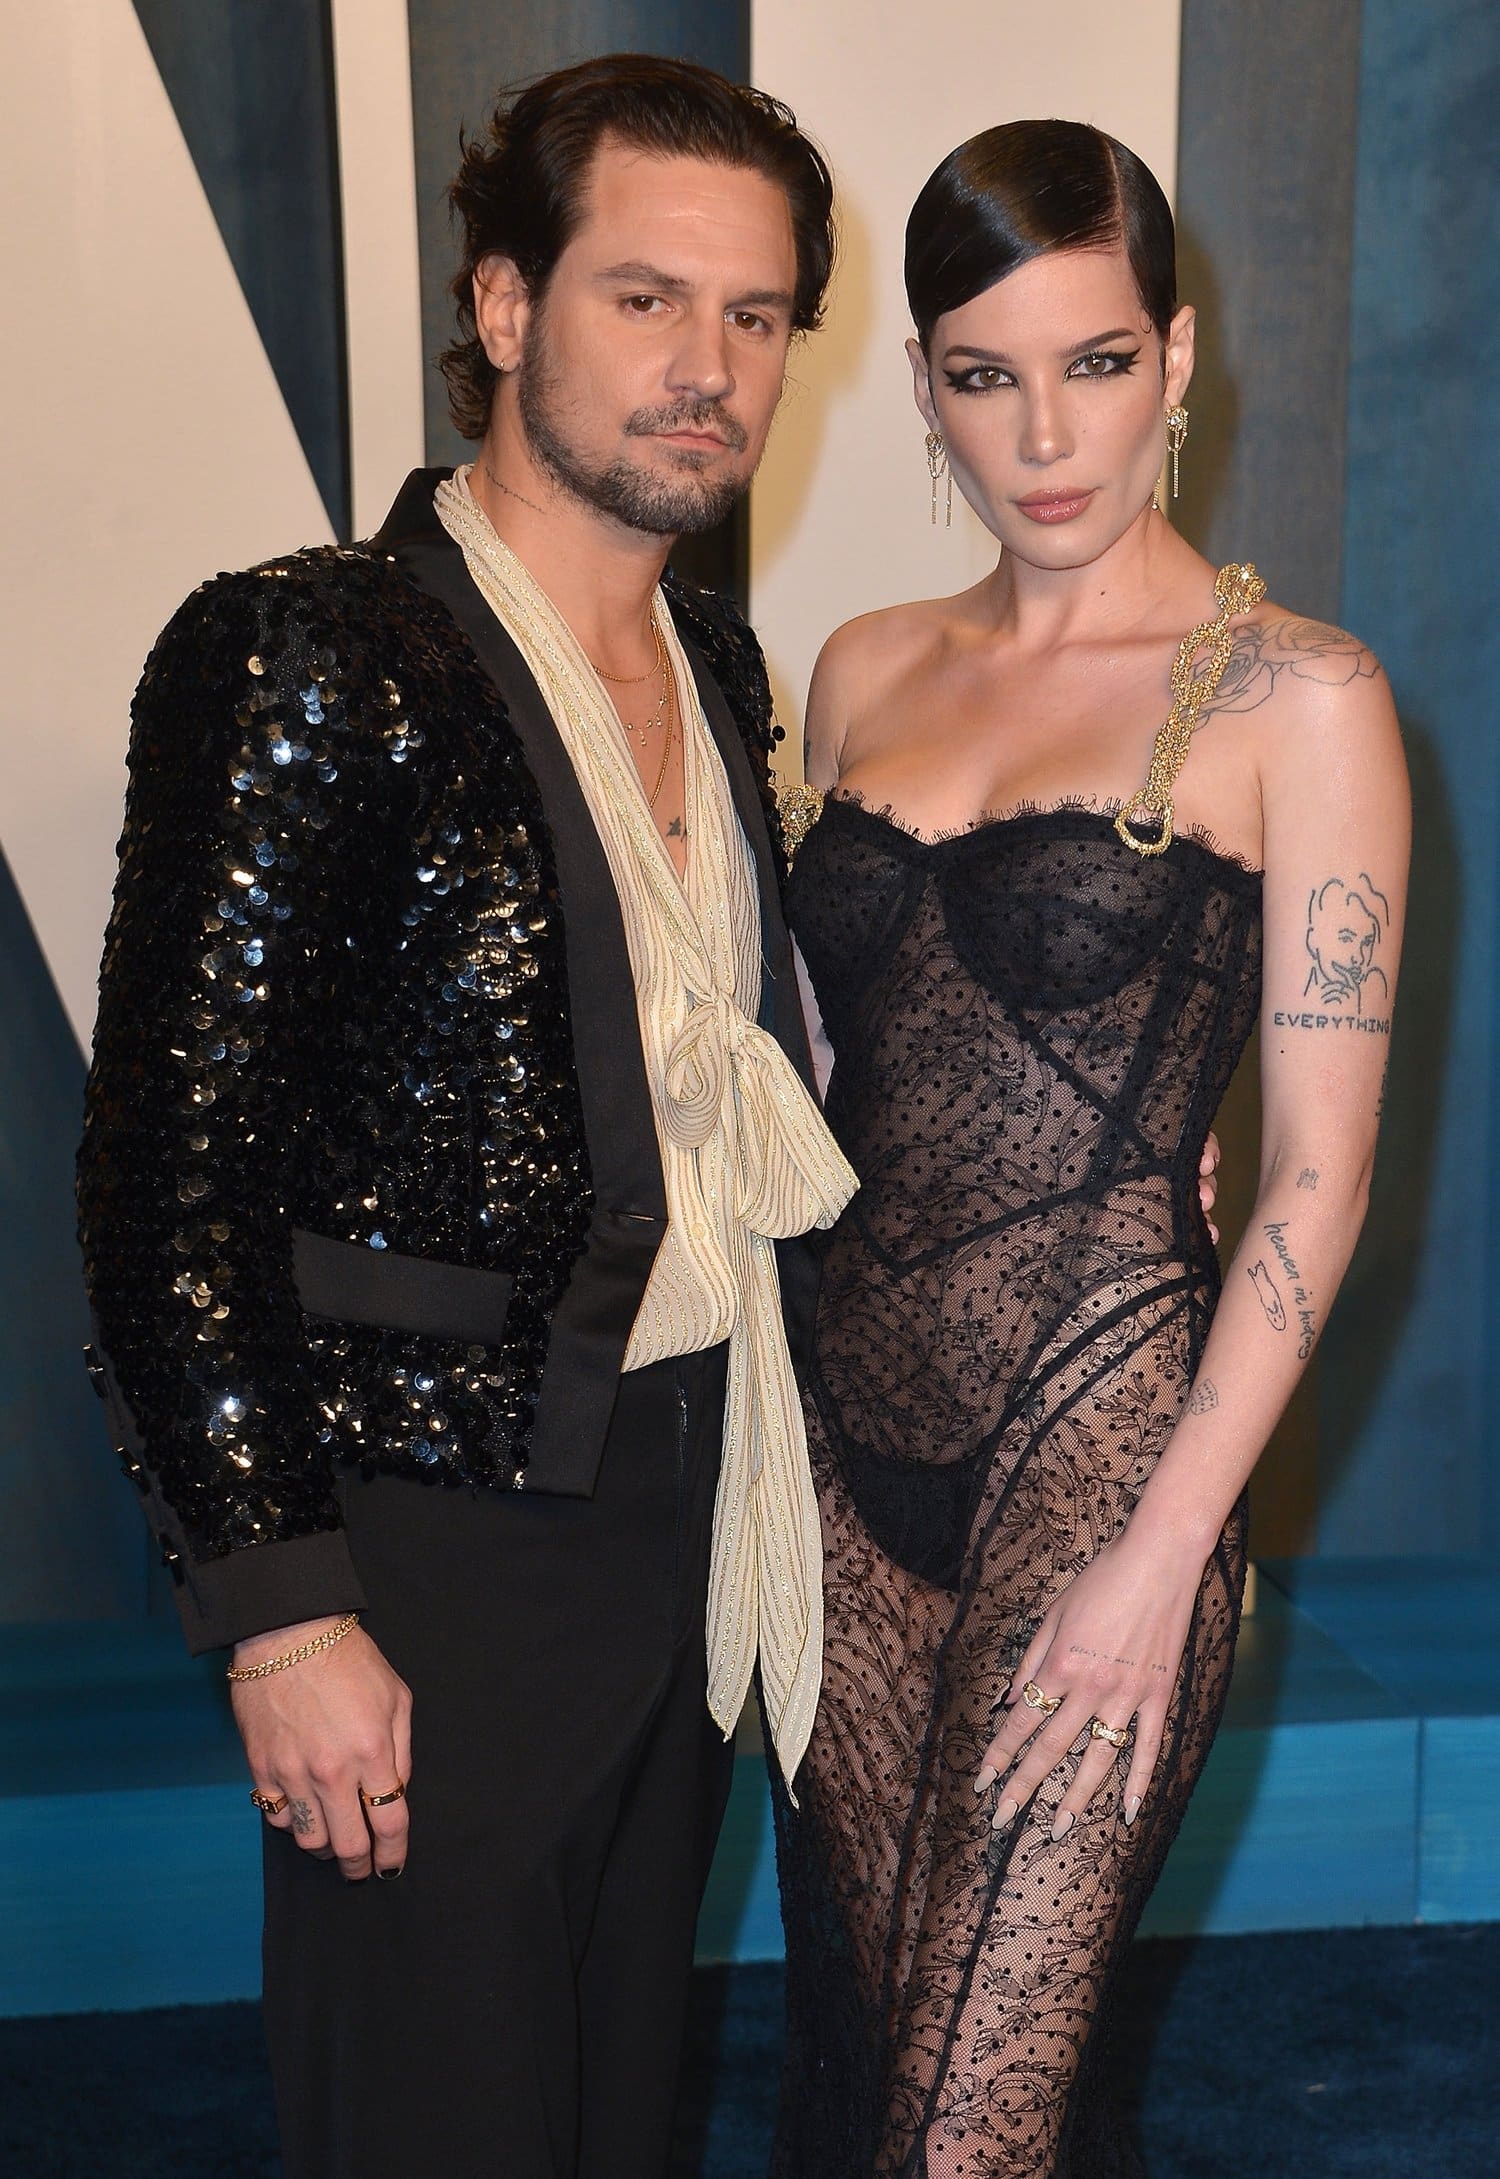 Halsey, in a sheer Dolce & Gabanna dress that displayed her underwear, and her boyfriend Alev Aydin attend the 2022 Vanity Fair Oscar Party